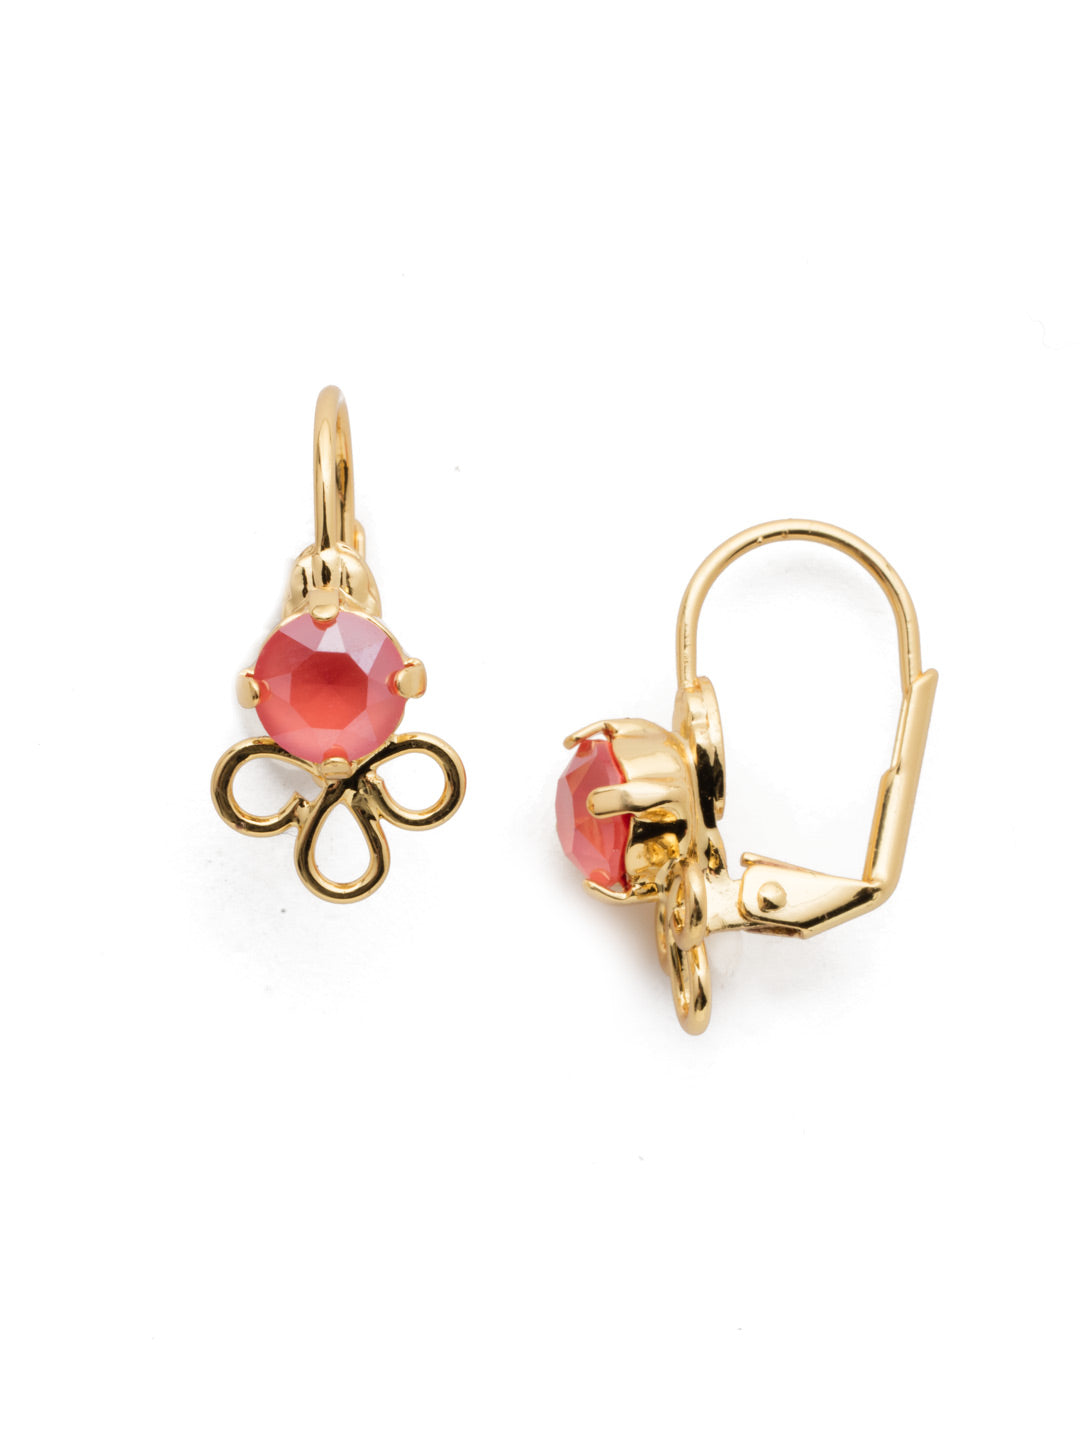 Prunella Dangle Earrings - EES13BGBGA - The Prunella French Wire Dangle Earrings are delicate and simply perfect for spring with their airy metal detail and just a hint of crystal shimmer. From Sorrelli's Begonia collection in our Bright Gold-tone finish.